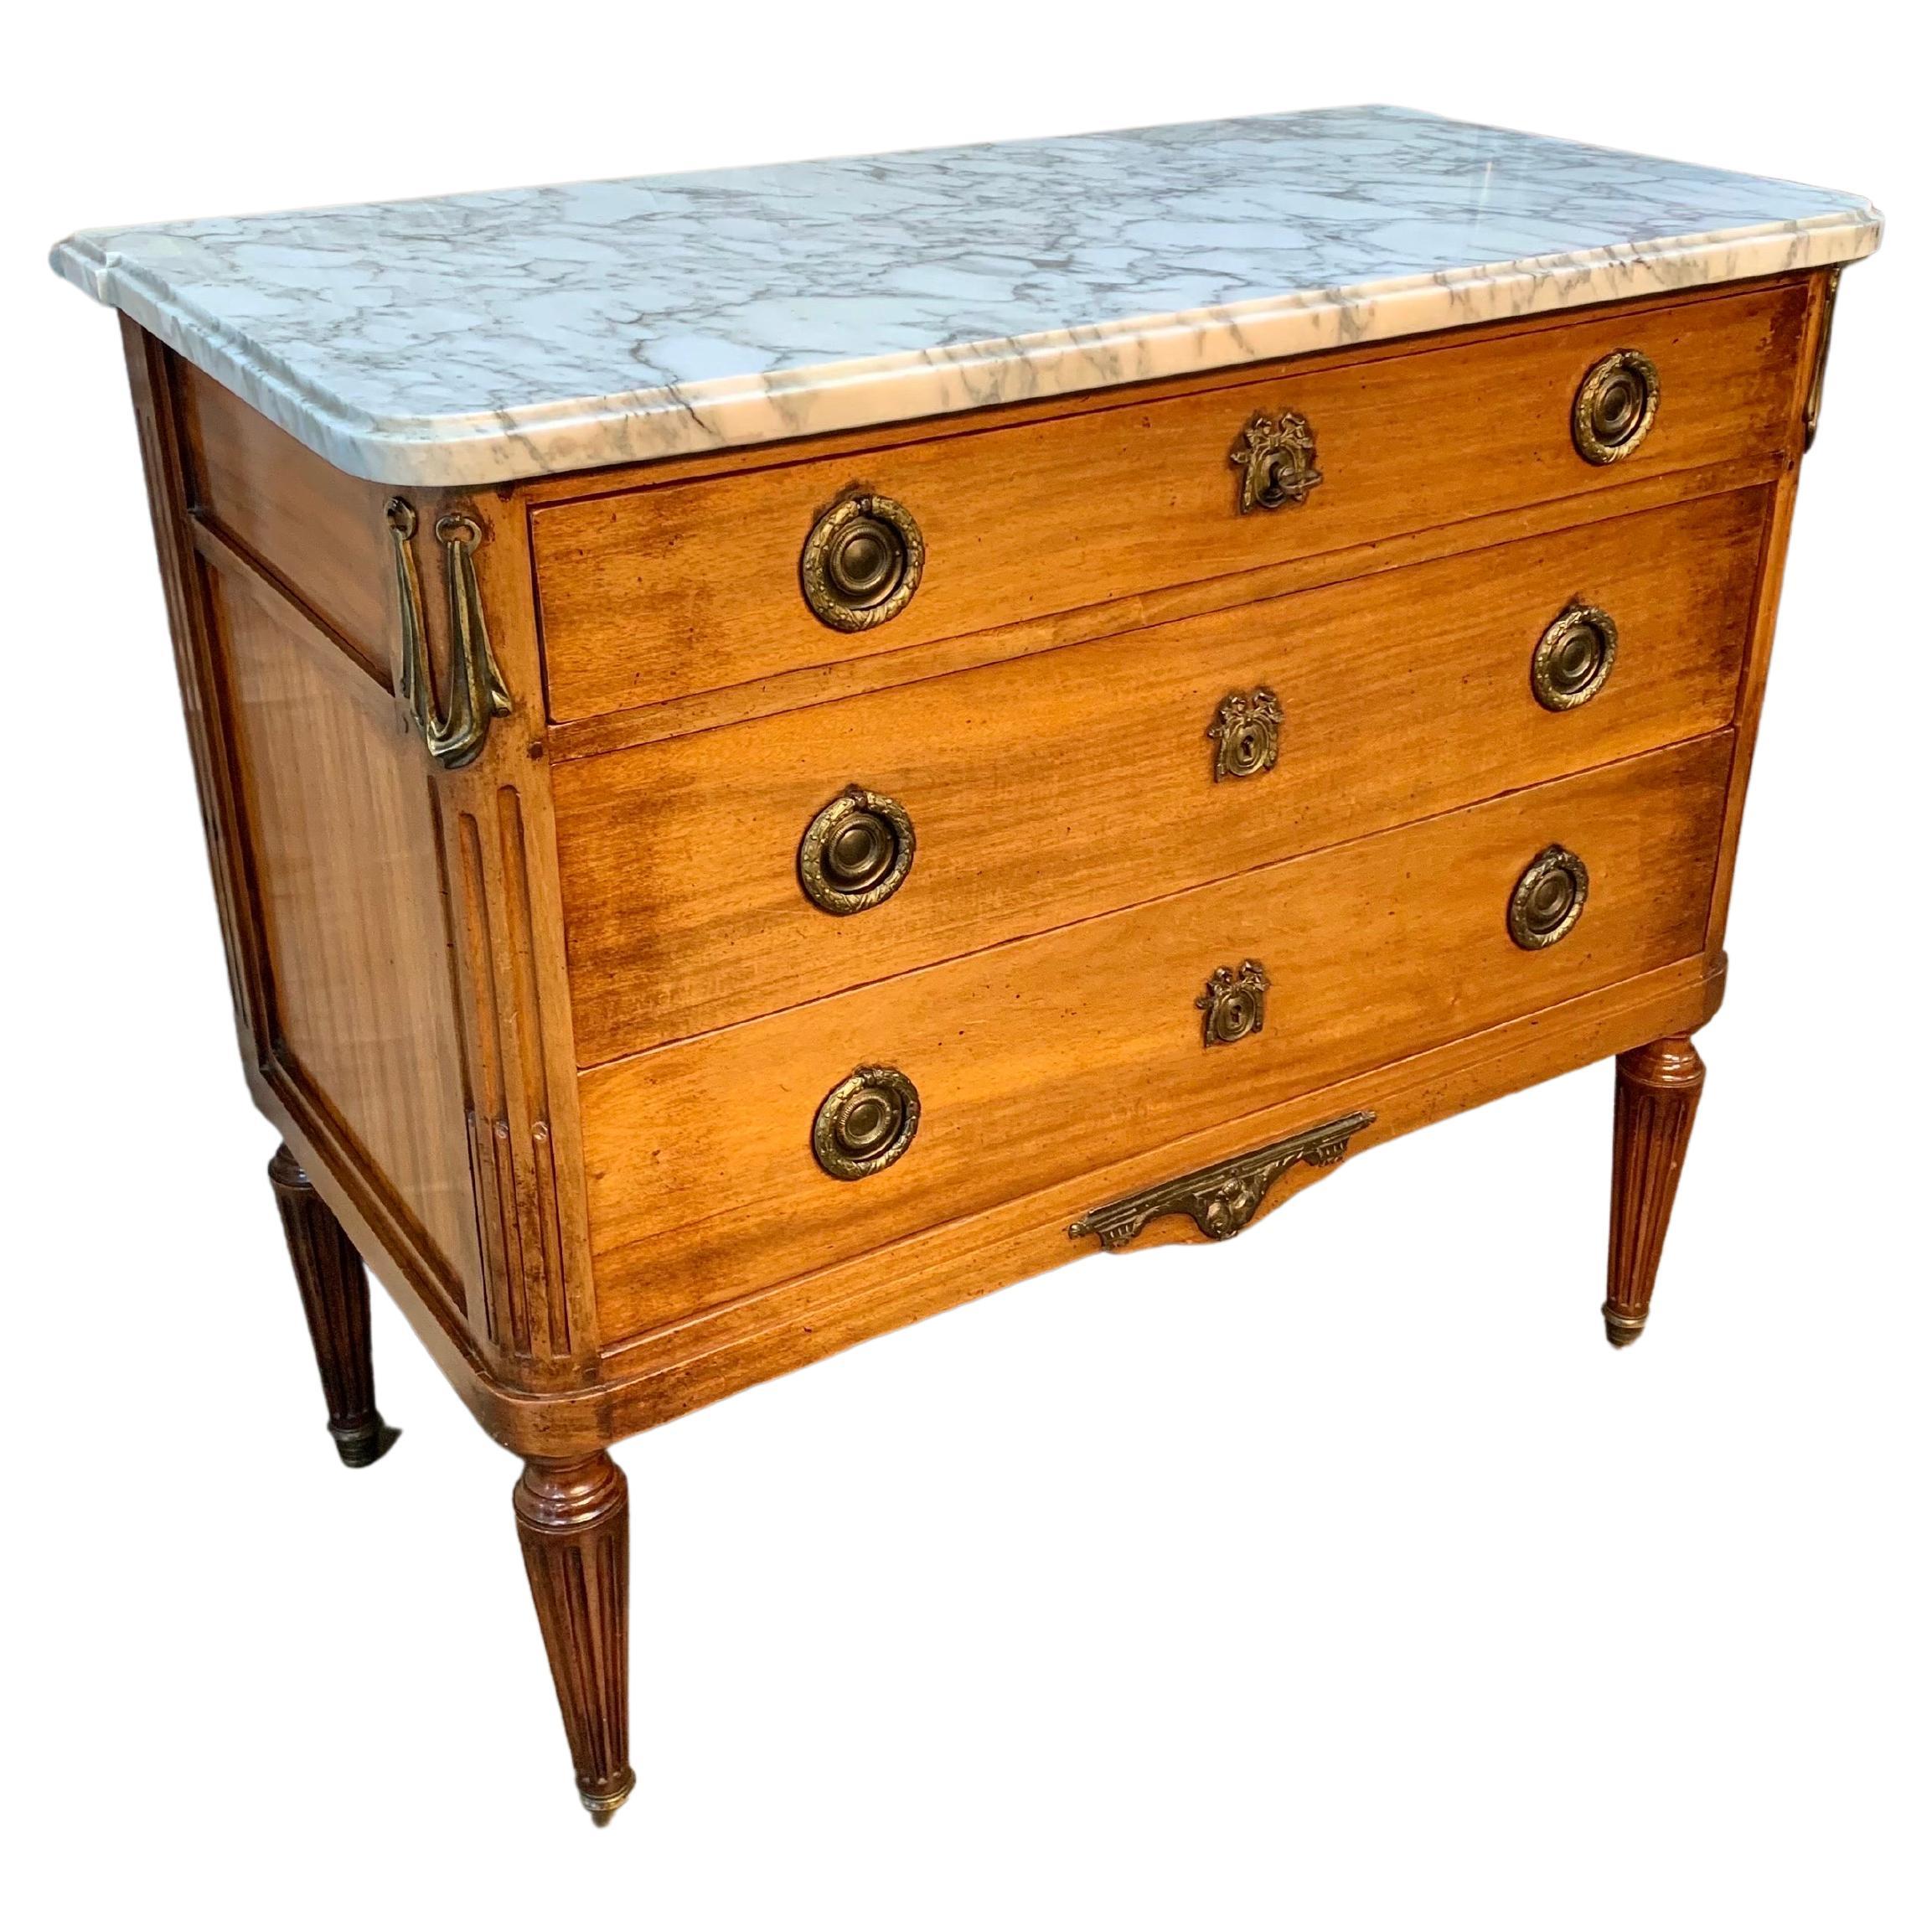 Early 1900s French Louis XVI Walnut Chest of Drawers with Marble Top